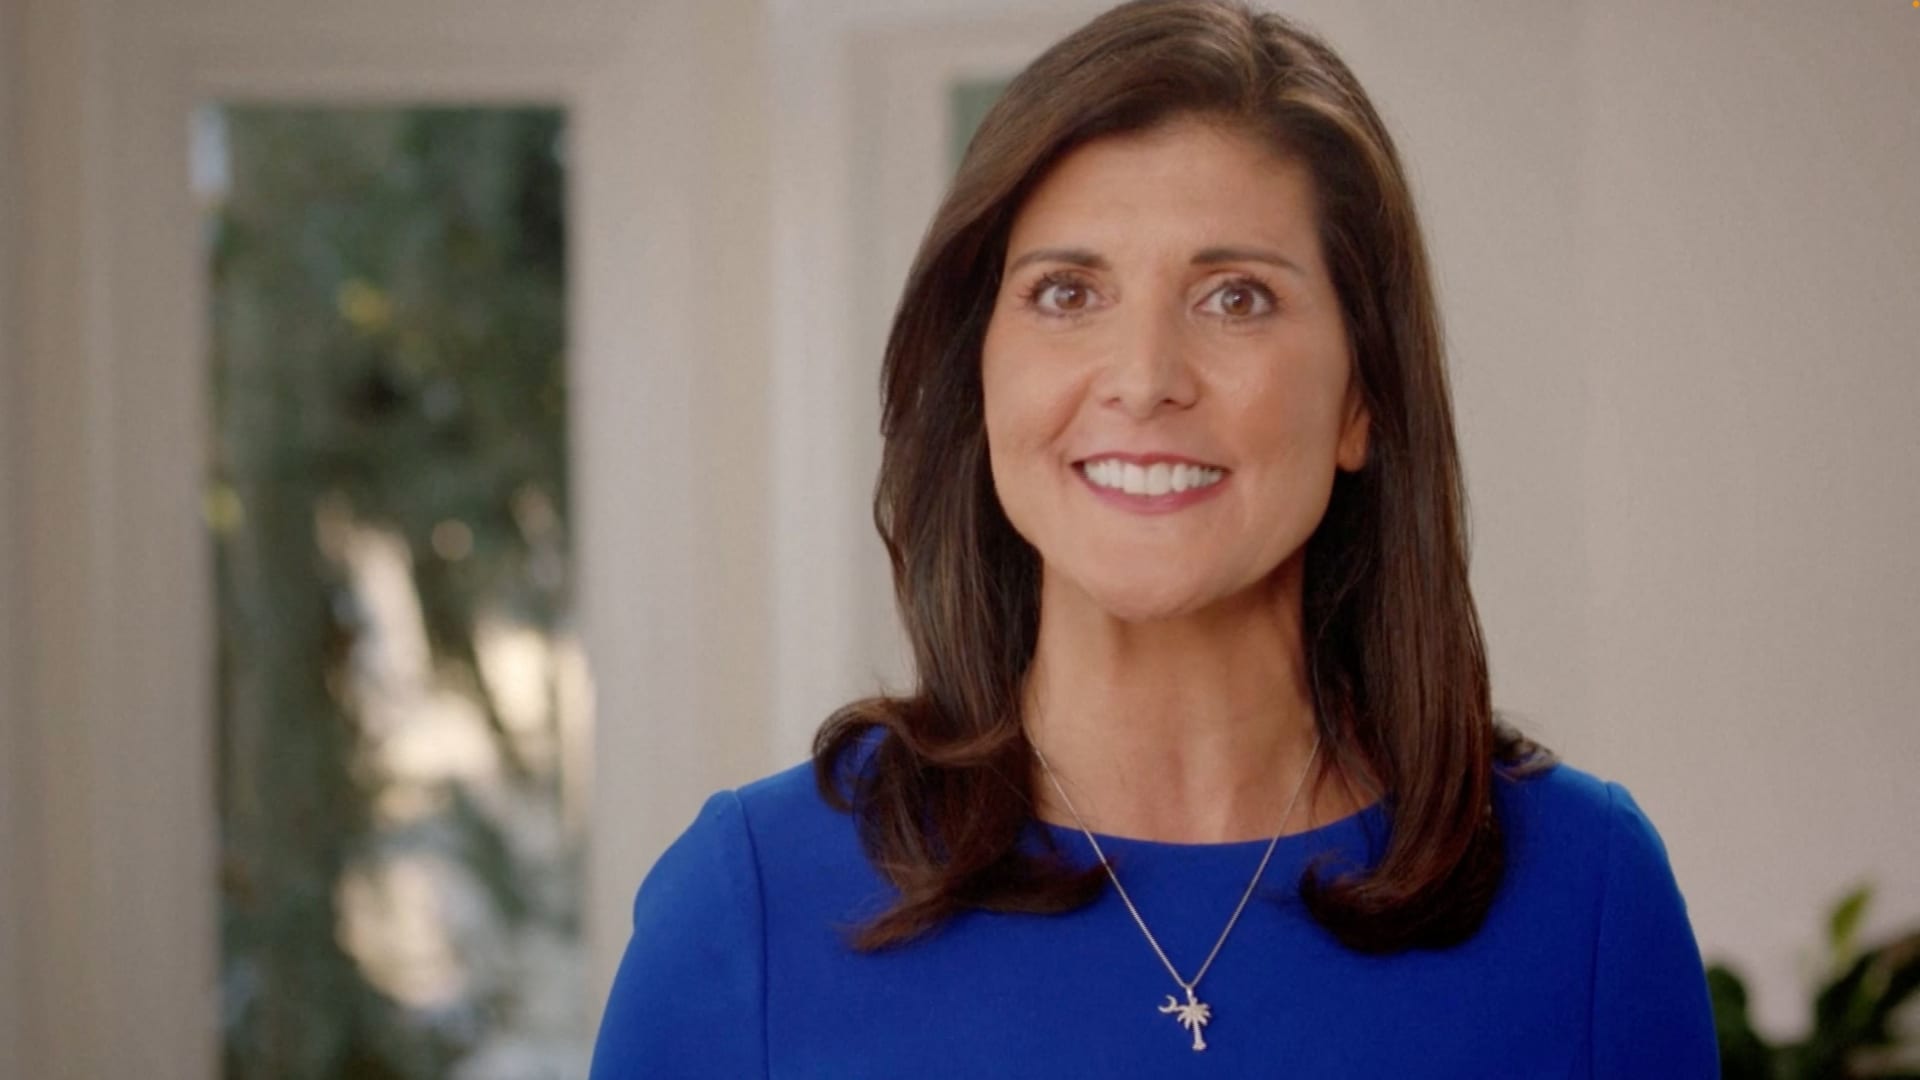 Former South Carolina Governor Nikki Haley announces her run for 2024 U.S. presidential election, in this still image obtained from an undated social media video released on February 14, 2023. 